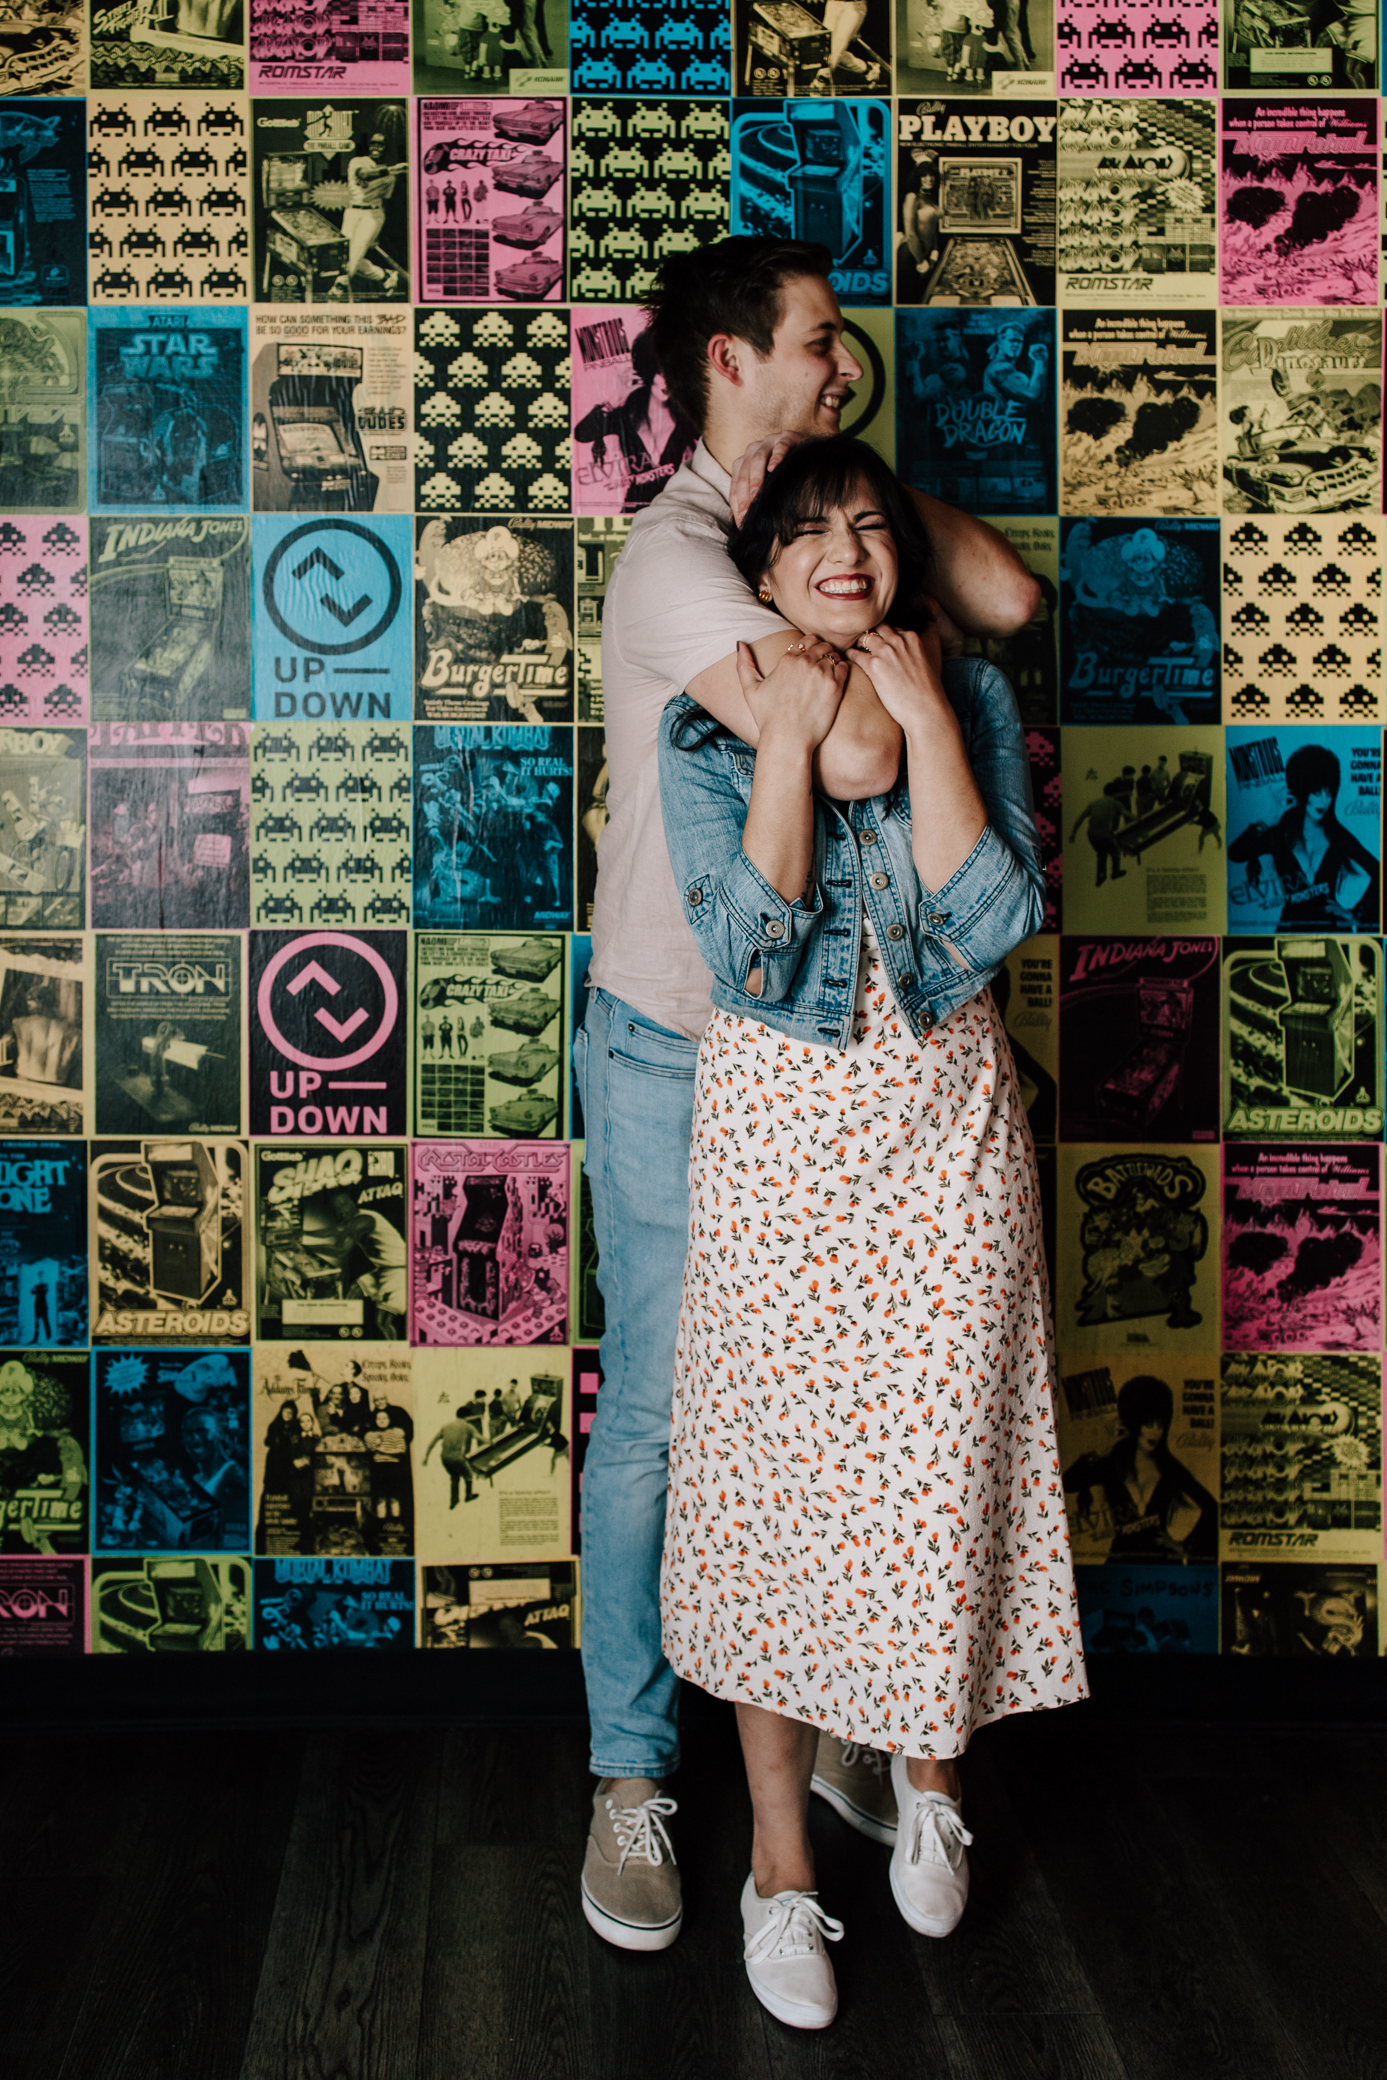 An engaged couple standing in front of a wall with arcade graphics at Up-Down Arcade in St. Louis, Missouri. The man playfully has the woman in a chokehold and they're both smiling.